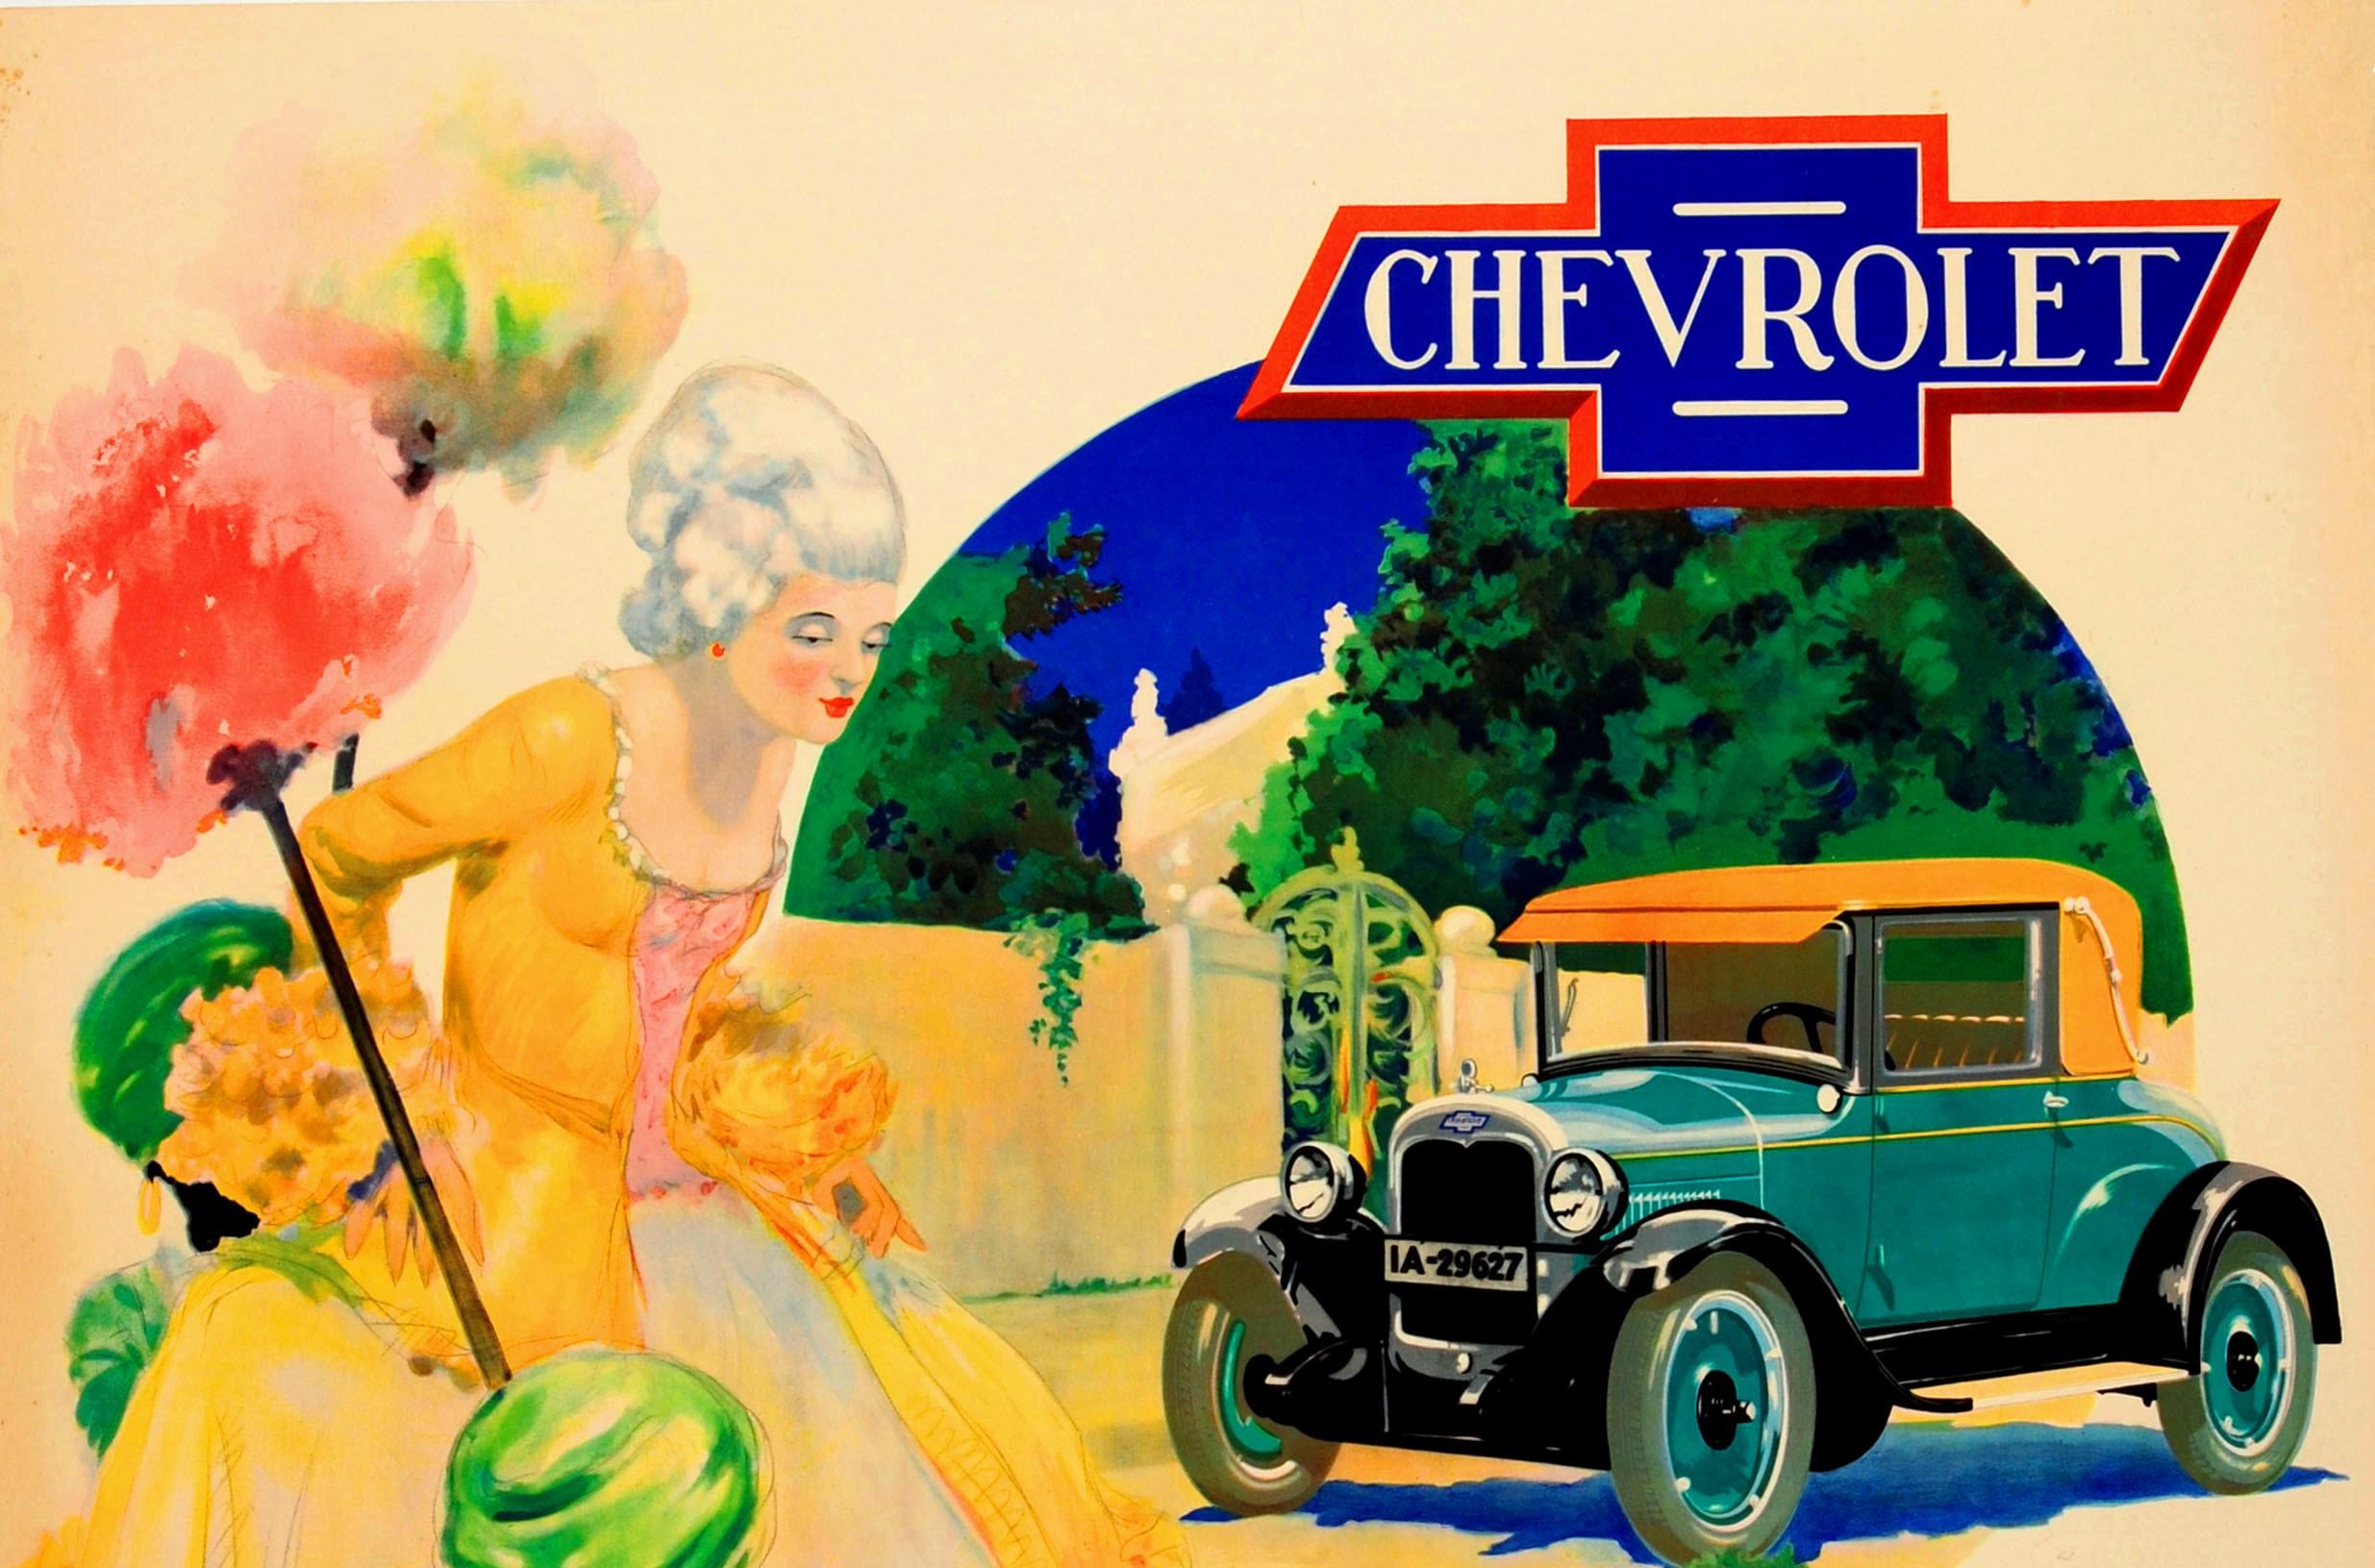 Original vintage car advertising poster for Chevrolet, the most elegant of the small cars / der eleganteste der kleinen wagen. Great artwork by Emerich Huber (1903-1979) of a lady wearing a yellow Georgian period dress with two children wearing